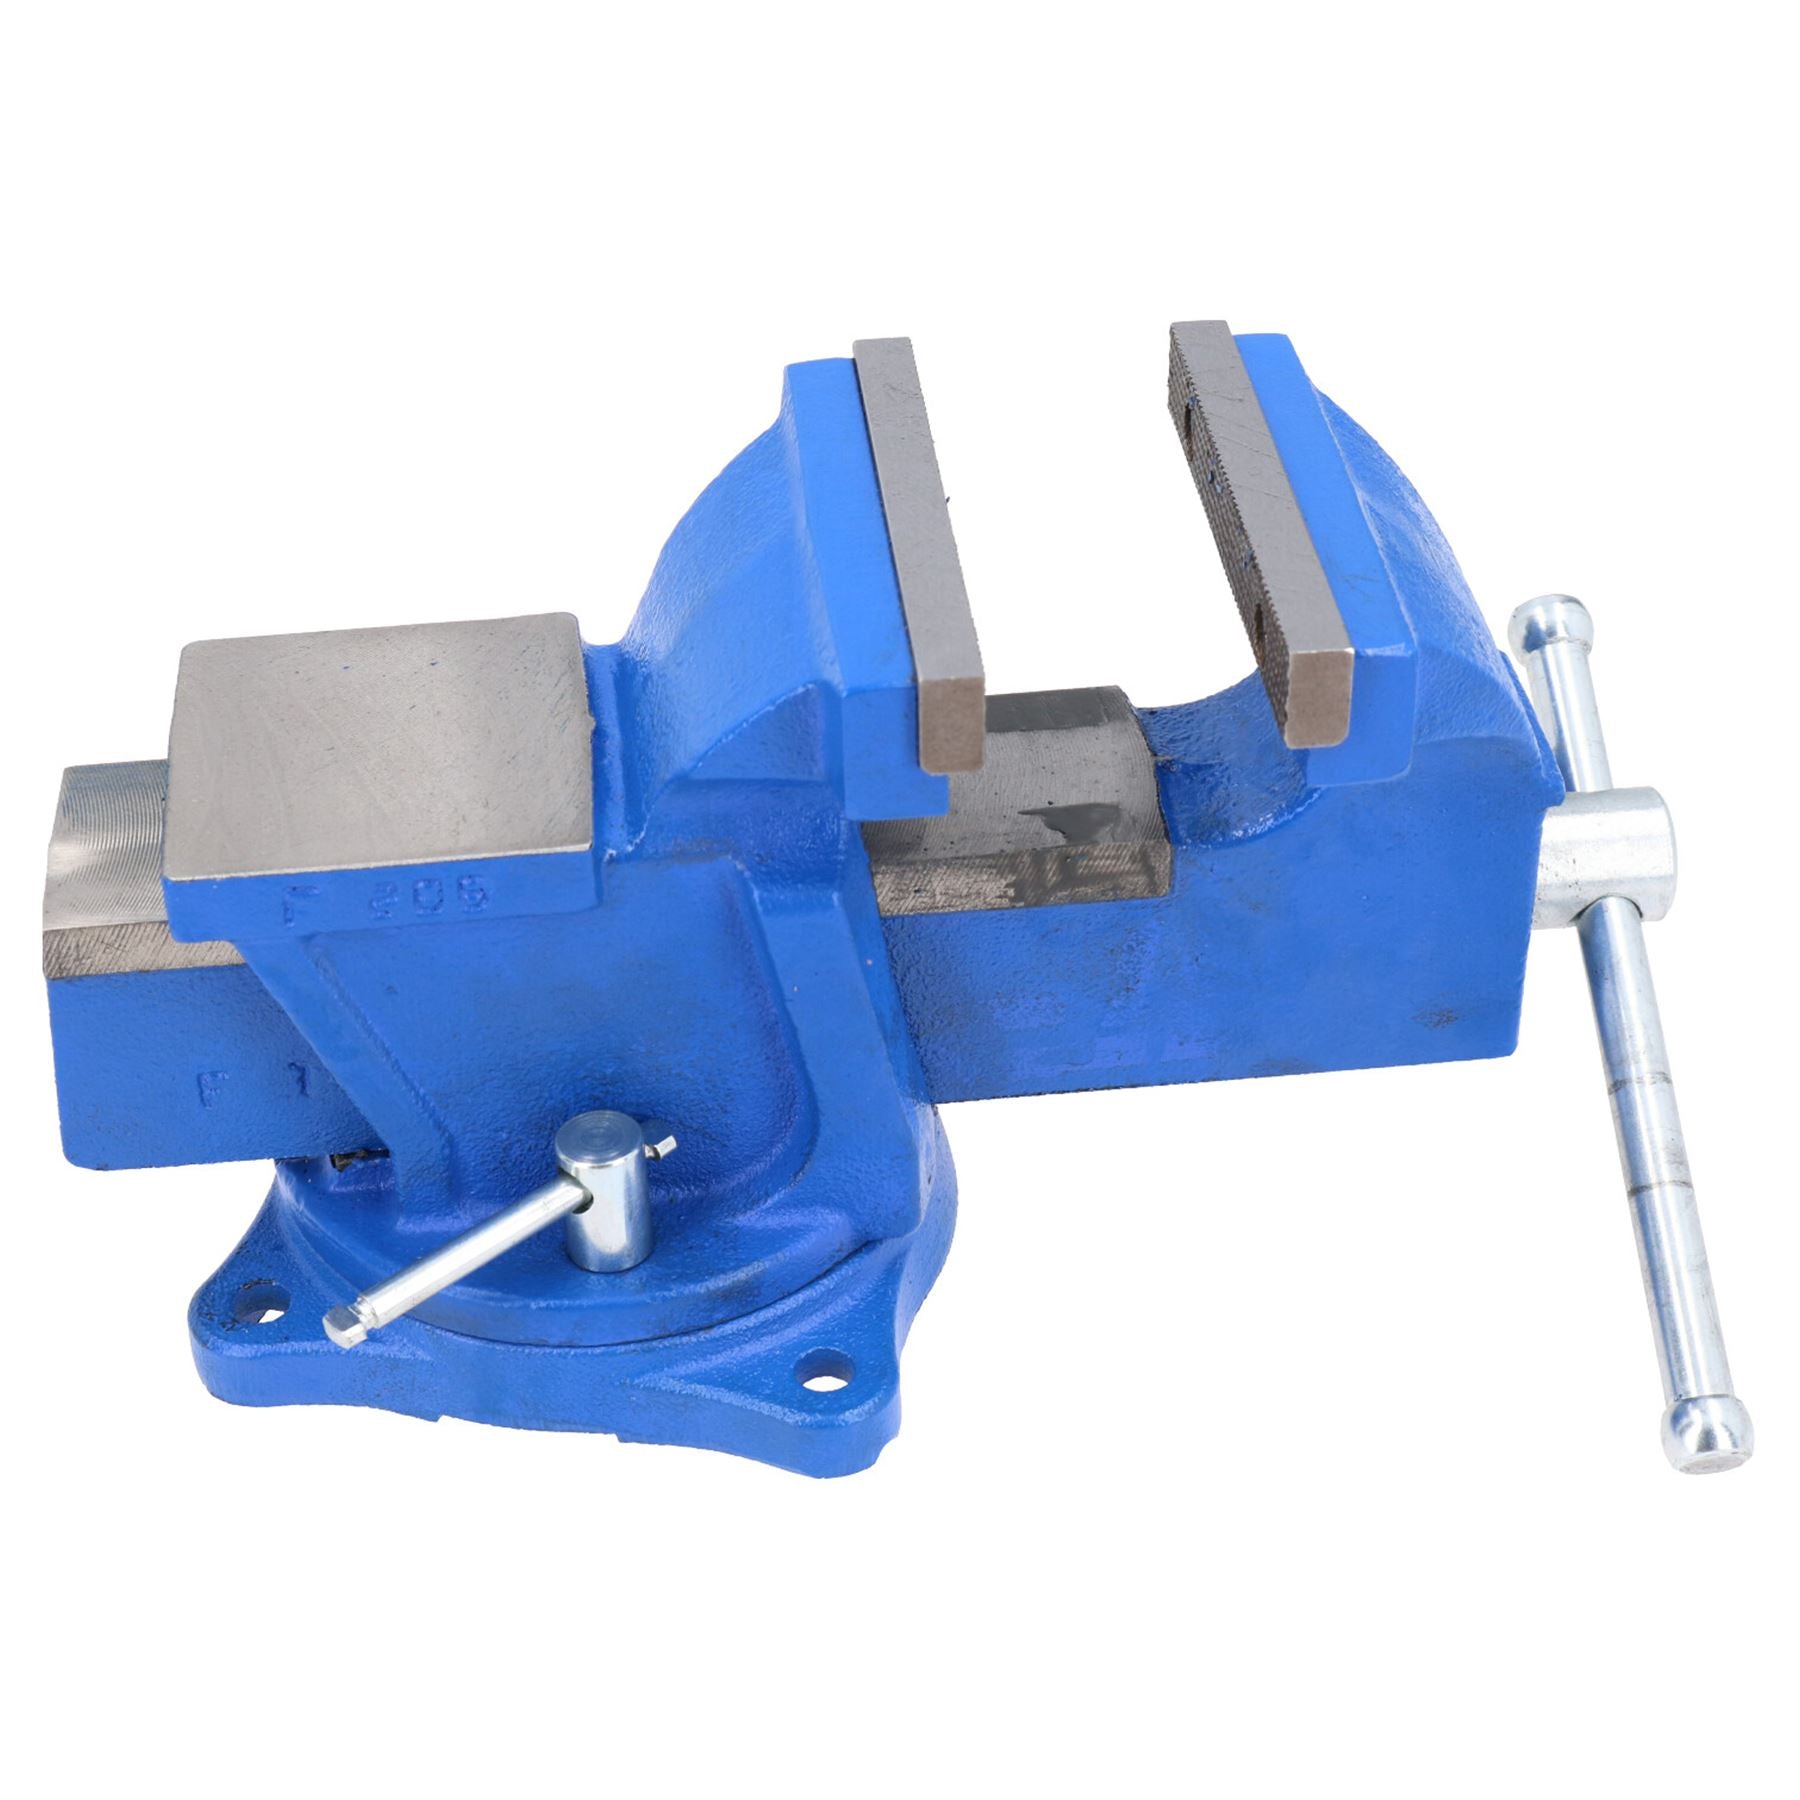 4” Heavy Duty Engineer Swivel Bench Vice Vise Clamp Workbench with Anvil